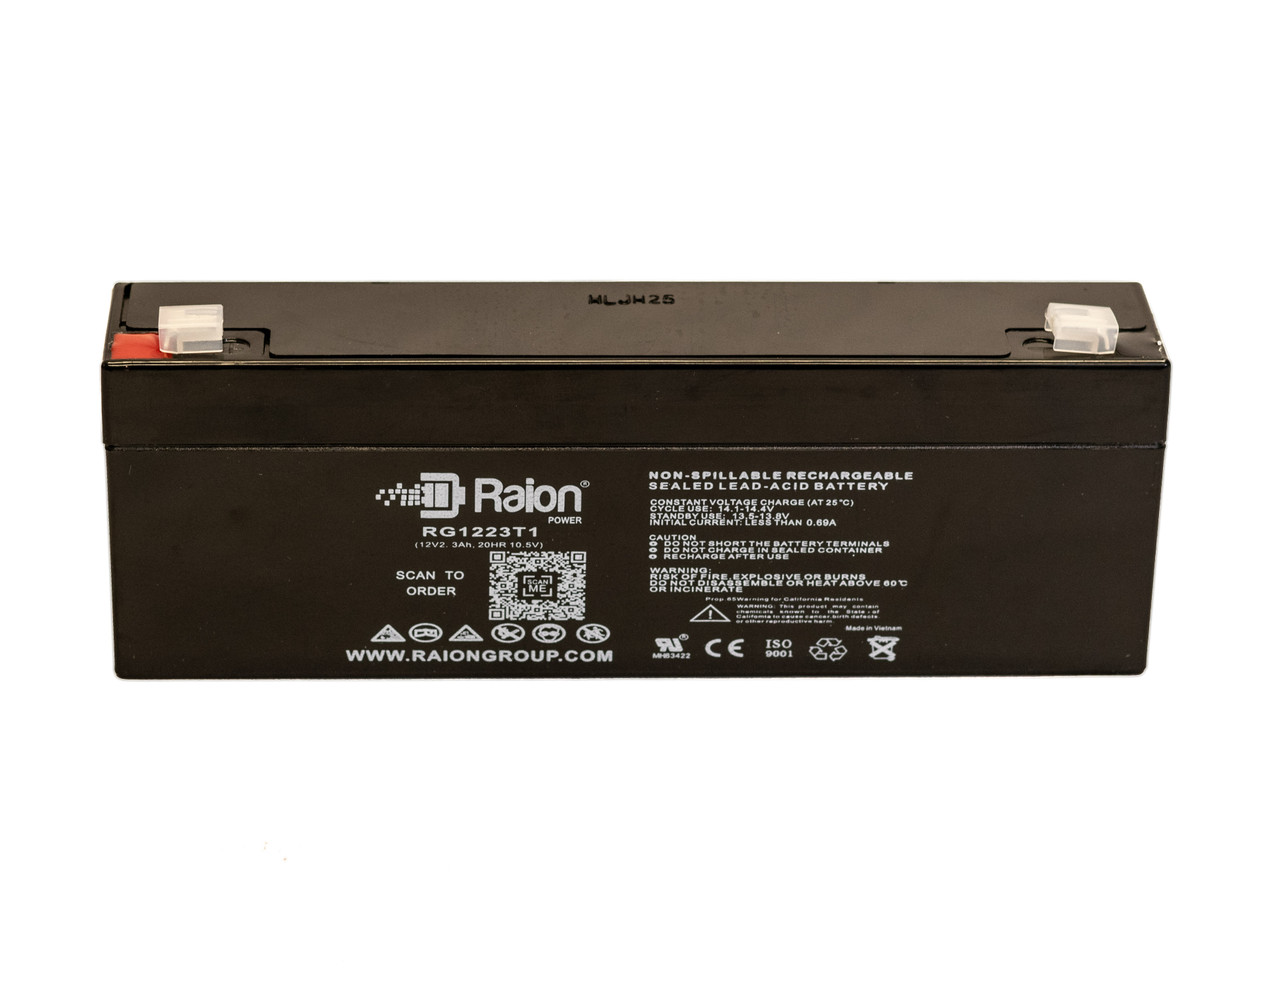 Raion Power 12V 2.3Ah SLA Battery With T1 Terminals For Medical Research Lab 550ST Defibrillator